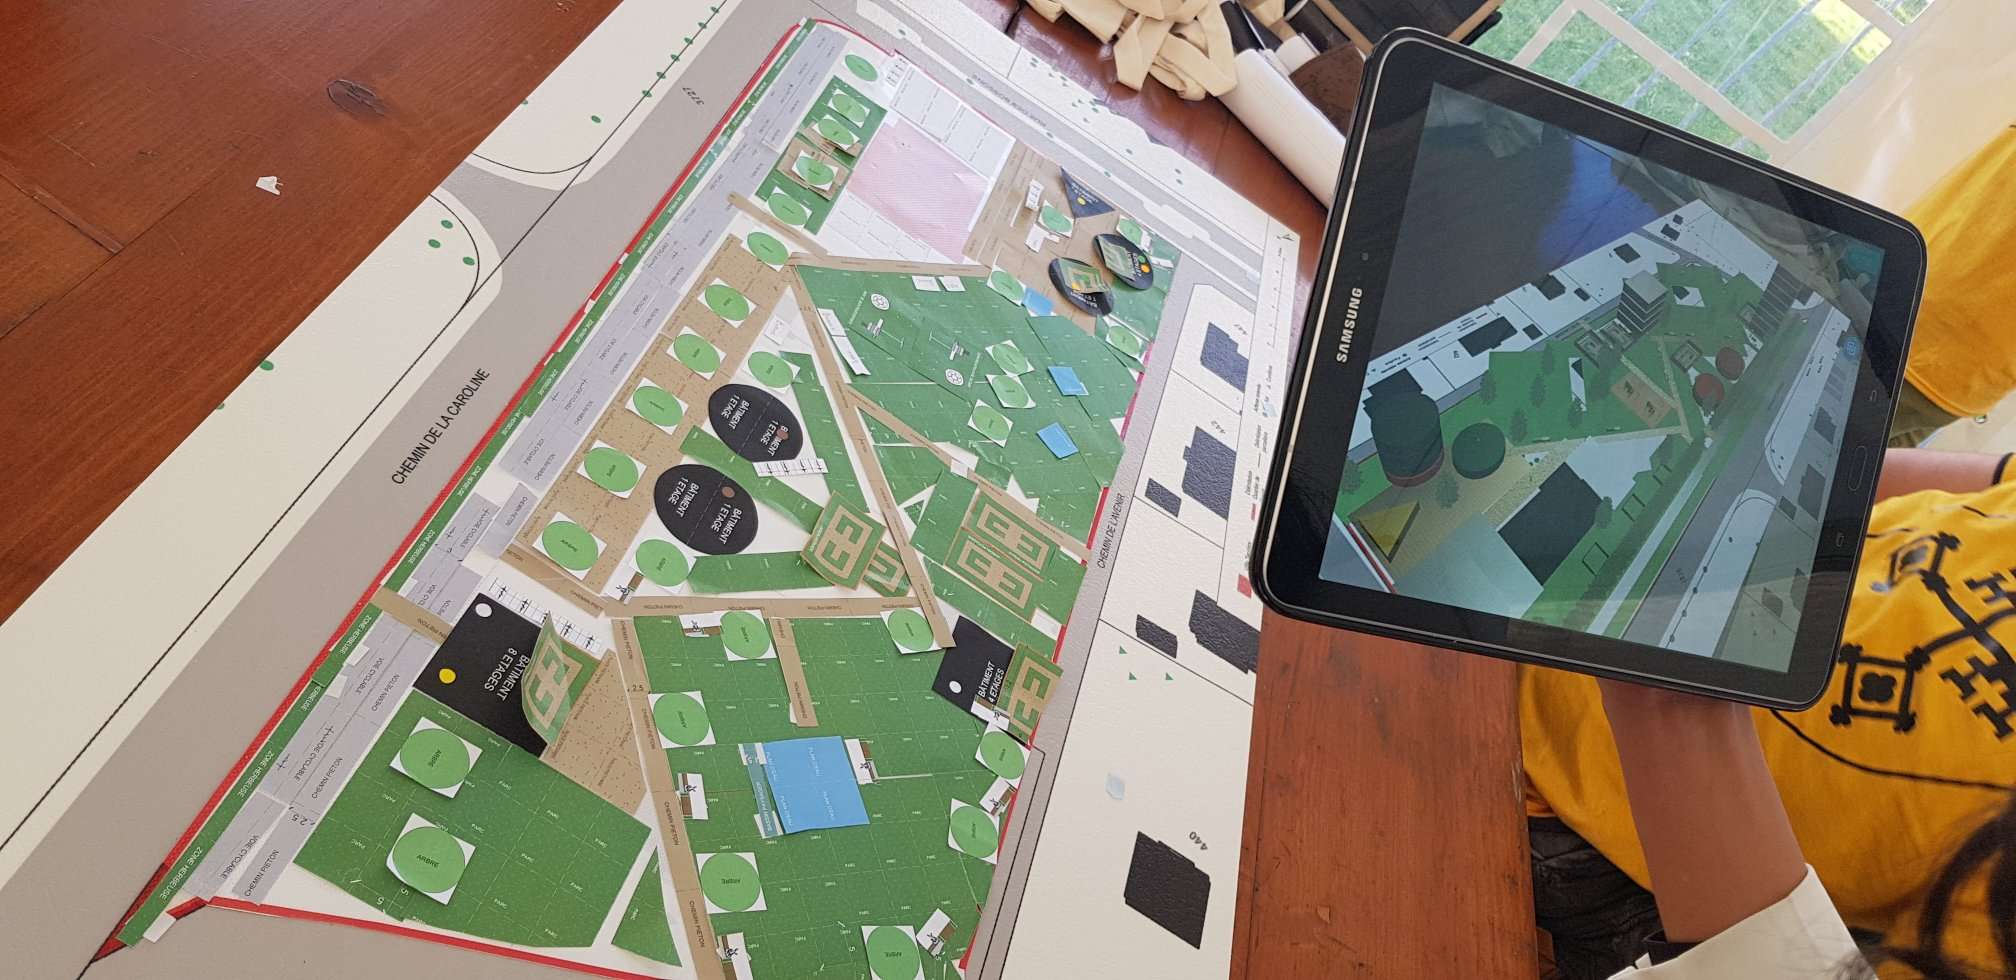 Augmented reality application for urban planning